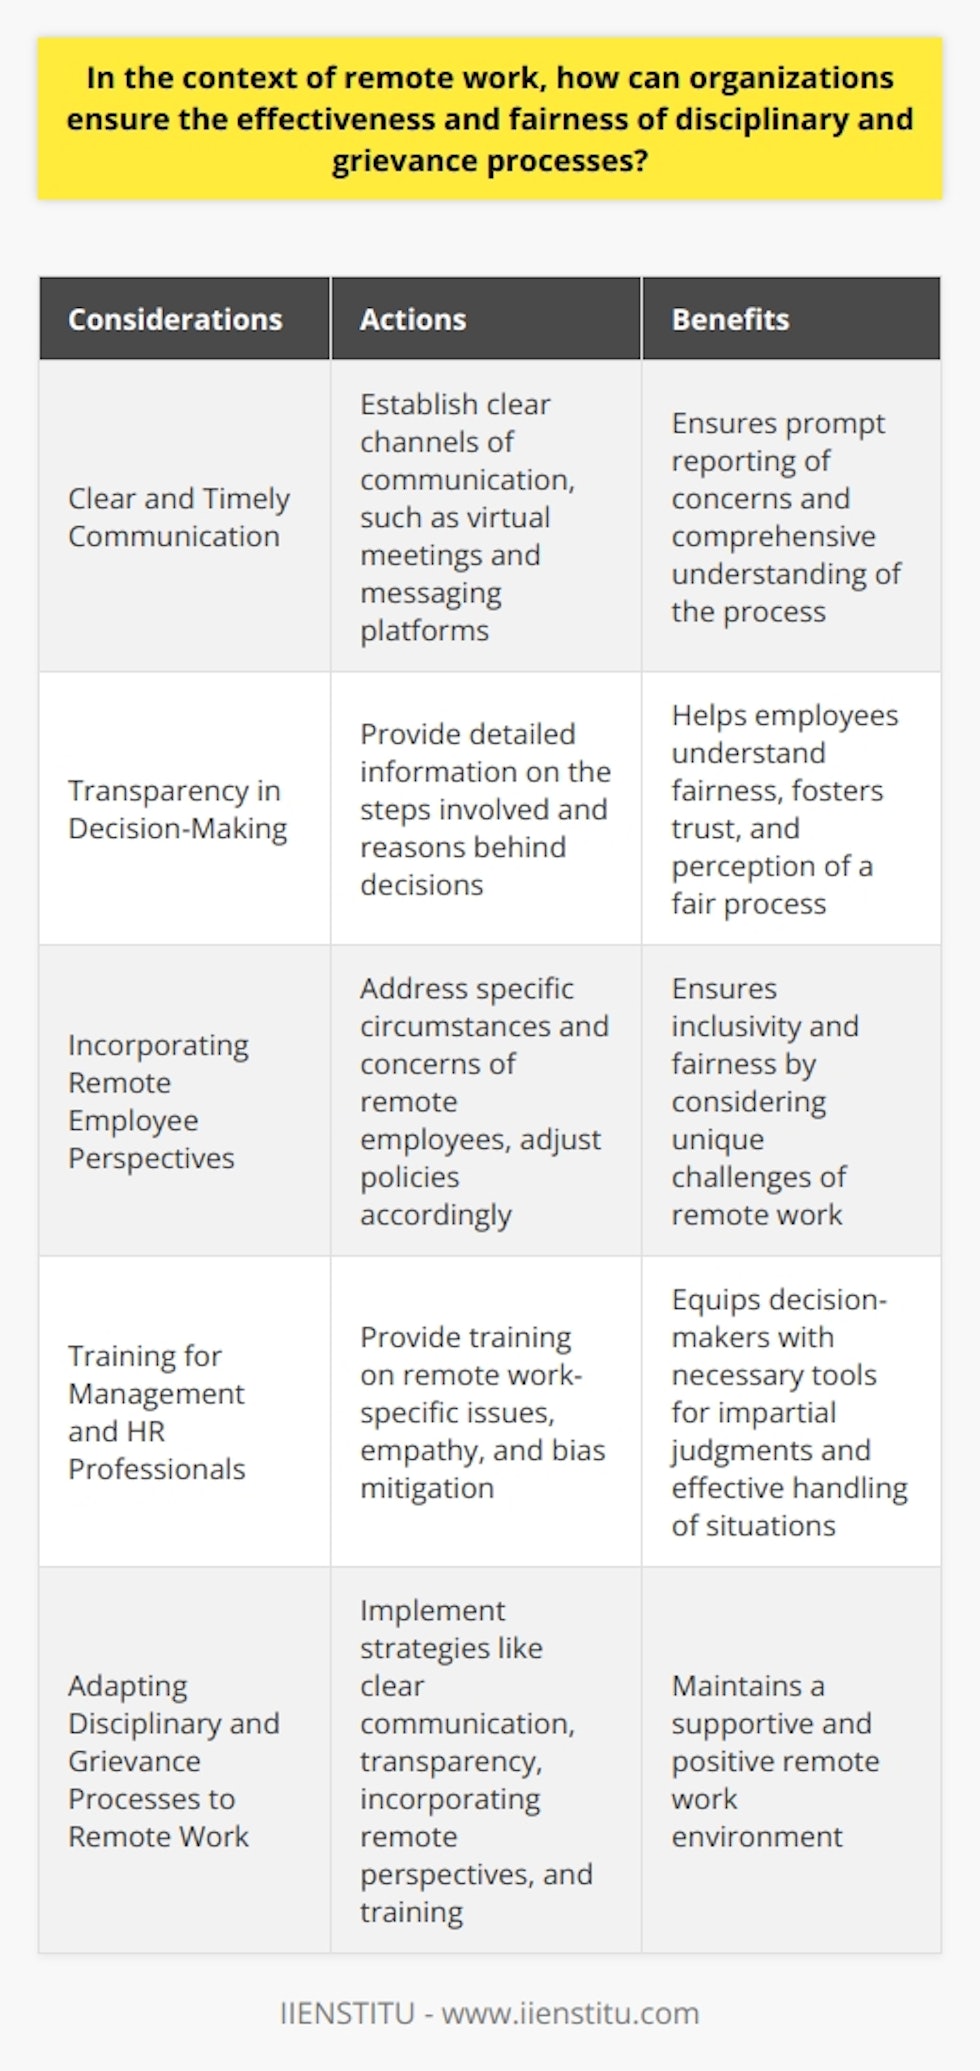 In the context of remote work, organizations face unique challenges when it comes to ensuring the effectiveness and fairness of disciplinary and grievance processes. With employees working from various locations, it is crucial for organizations to adapt their policies and practices to accommodate these differences and foster a positive remote work environment. Here are some key considerations for organizations to ensure fairness and effectiveness in disciplinary and grievance processes:1. Clear and Timely Communication: Communication plays a critical role in ensuring that employees are aware of the expectations and procedures surrounding disciplinary and grievance processes. Organizations should establish clear channels of communication, such as virtual meetings and messaging platforms, to facilitate ongoing dialogue between employees and management. This ensures that concerns can be reported promptly and provides employees with a comprehensive understanding of what to expect during the process.2. Transparency in Decision-Making: Maintaining transparency in decision-making is essential for employees to perceive the process as fair. Organizations should provide detailed information on the steps involved in the process and the reasons behind decisions. By clearly communicating the rationale behind disciplinary actions, organizations can help employees understand the fairness of the process and foster trust.3. Incorporating Remote Employee Perspectives: Remote work brings its own unique challenges and experiences. Organizations should take into account the specific circumstances and concerns of remote employees when designing their disciplinary and grievance processes. This could include addressing issues related to technology or adjusting policies to accommodate time zone differences. By considering the unique perspectives of remote employees, organizations can ensure that their processes are inclusive and fair.4. Training for Management and HR Professionals: It is imperative that organizations provide adequate training to managers and human resources professionals on remote work-specific issues, empathy, and bias mitigation. Training should equip decision-makers with the necessary tools to make impartial judgments and handle sensitive situations effectively. By investing in training, organizations can ensure that disciplinary and grievance processes are carried out in a fair and unbiased manner.In conclusion, as remote work continues to become more prevalent, organizations must adapt their disciplinary and grievance processes to this new context. Clear communication, transparency, incorporating remote employee perspectives, and training for management and HR professionals are all critical elements in ensuring fairness and effectiveness in remote disciplinary and grievance processes. By implementing these strategies, organizations can maintain a supportive and positive remote work environment.